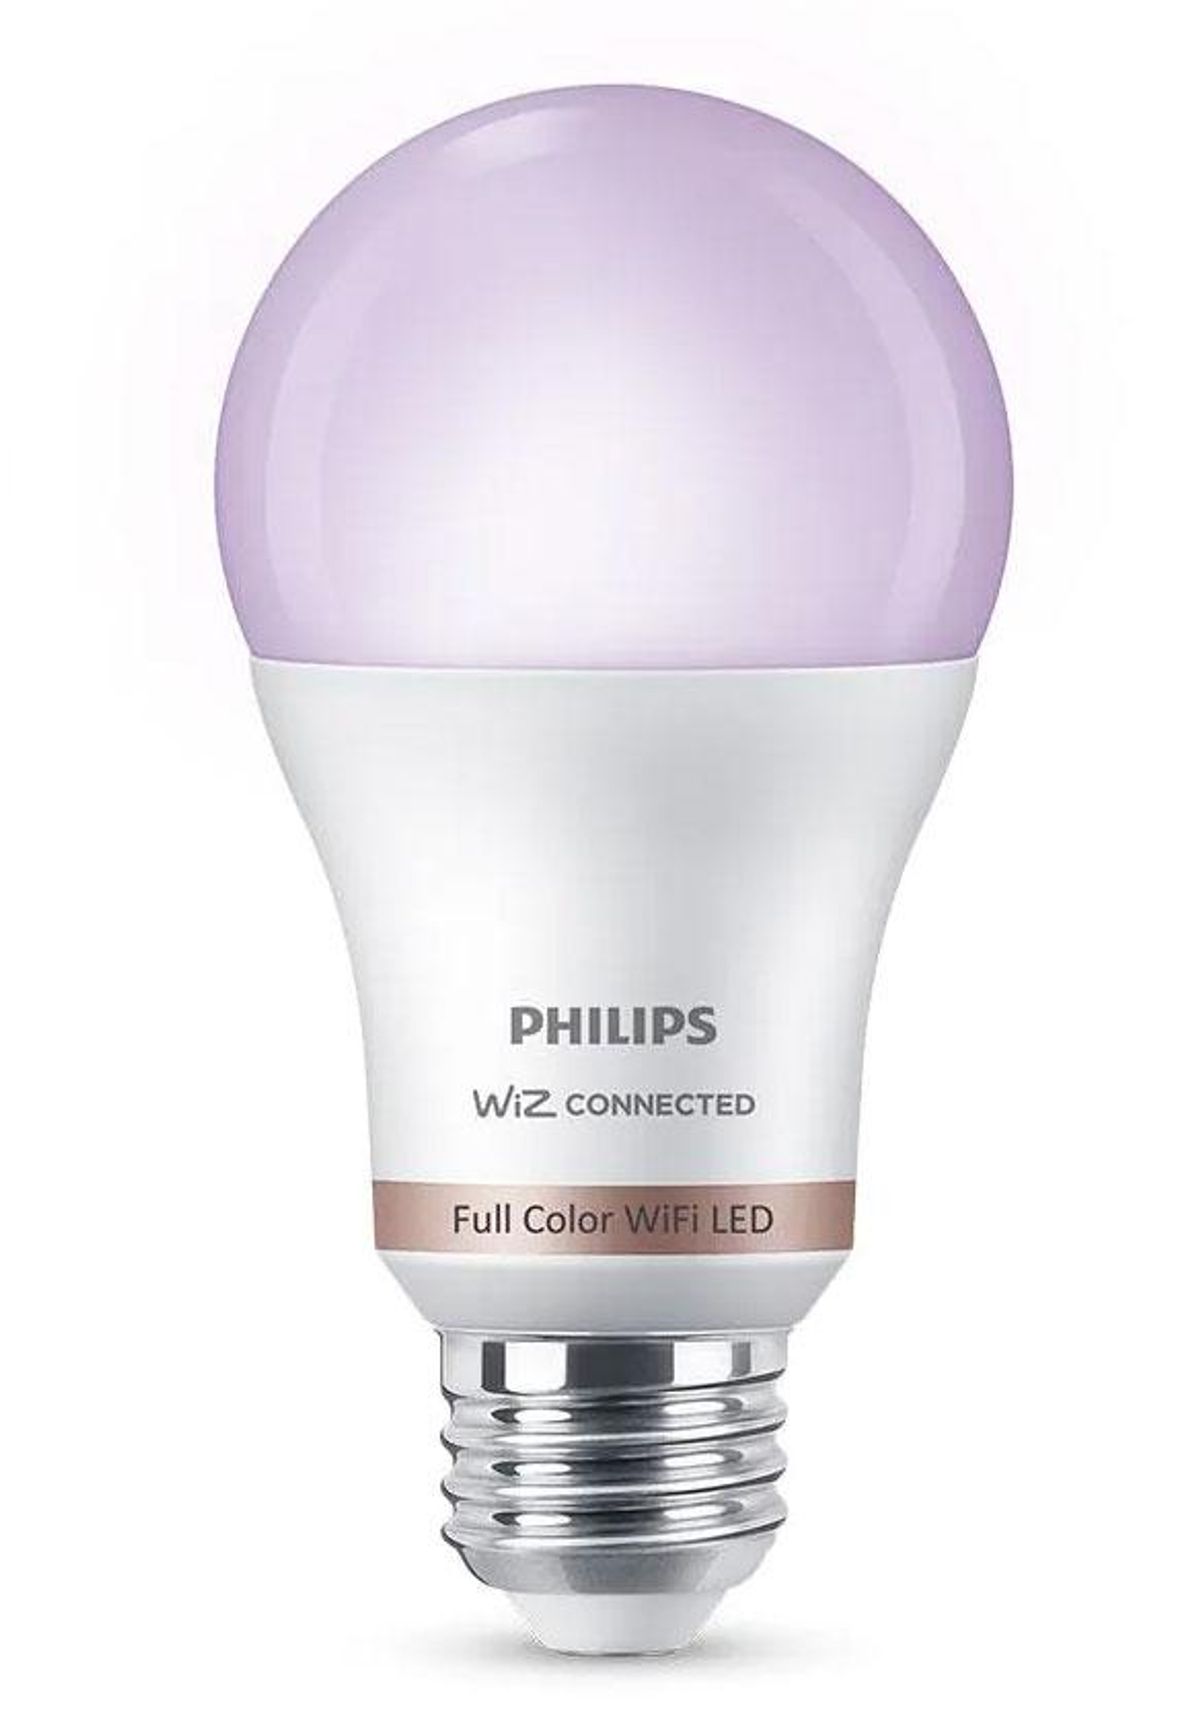 philips color and tunable white a19 led 60 watt equivalent dimmable smart wi fi wiz connected wireless light bulb